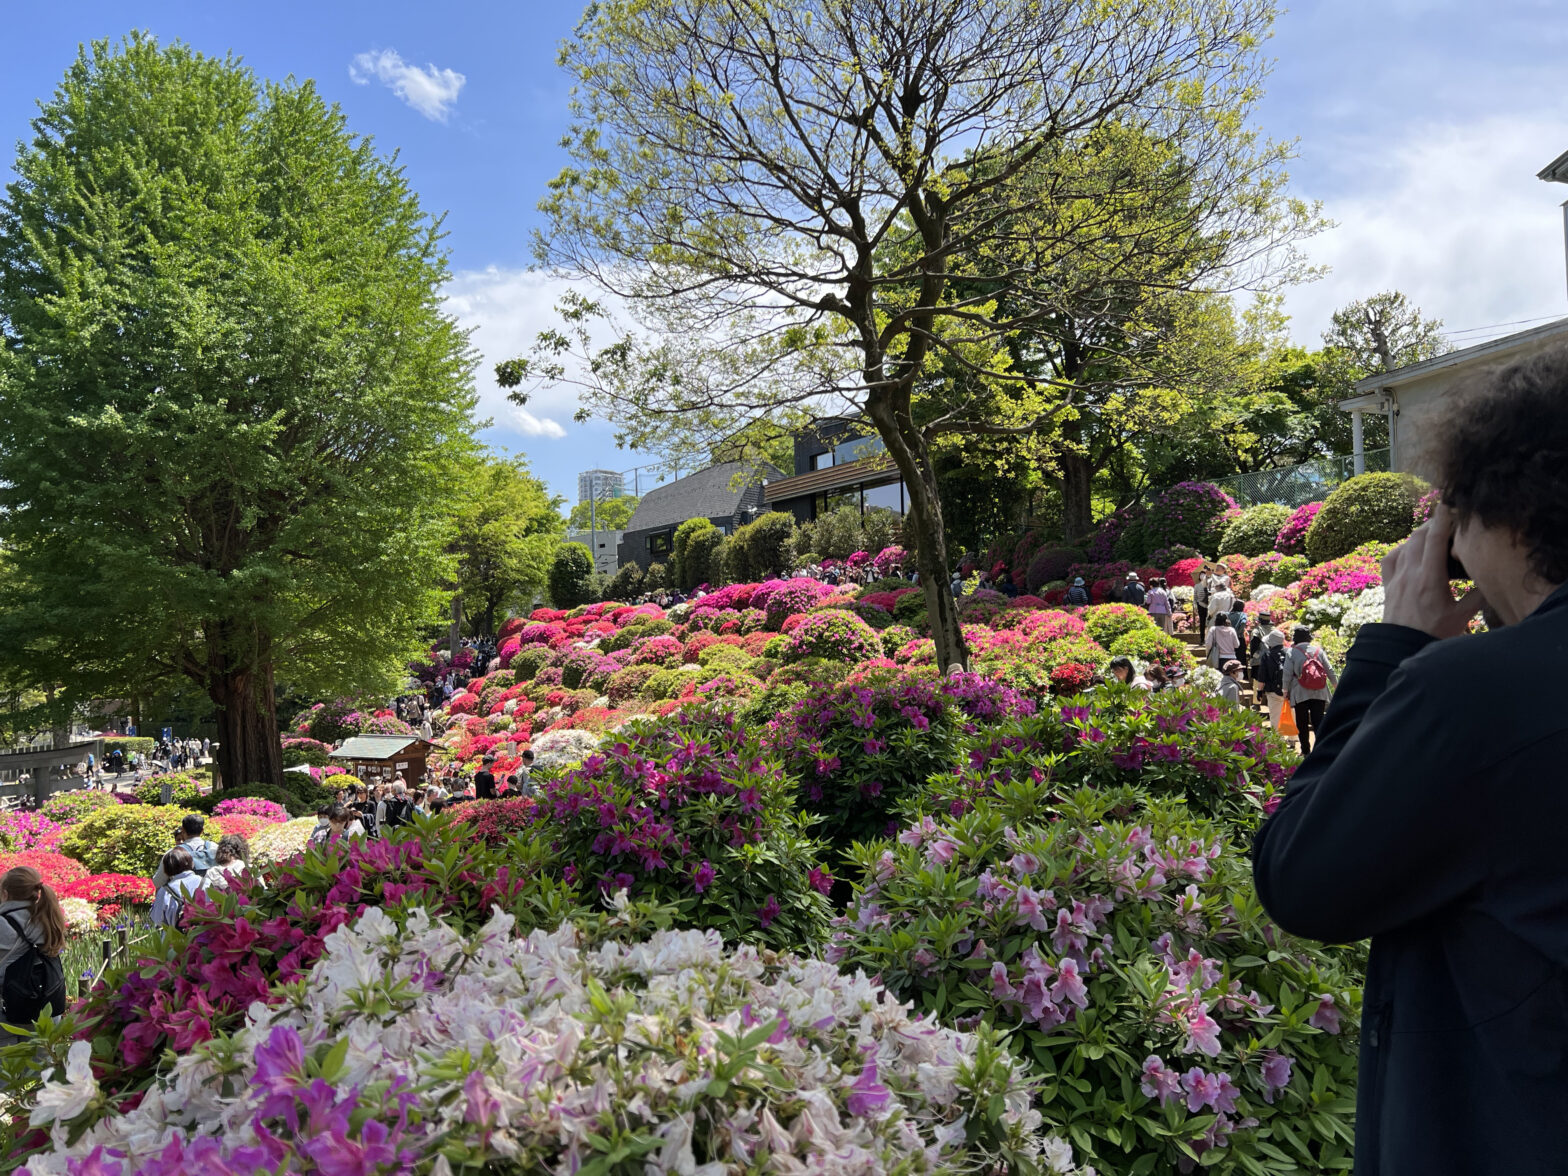 Brendan in profile, right foreground, photographing the hillside full of Azalea bushes, blooming in all shades of white, pink, magenta, and red